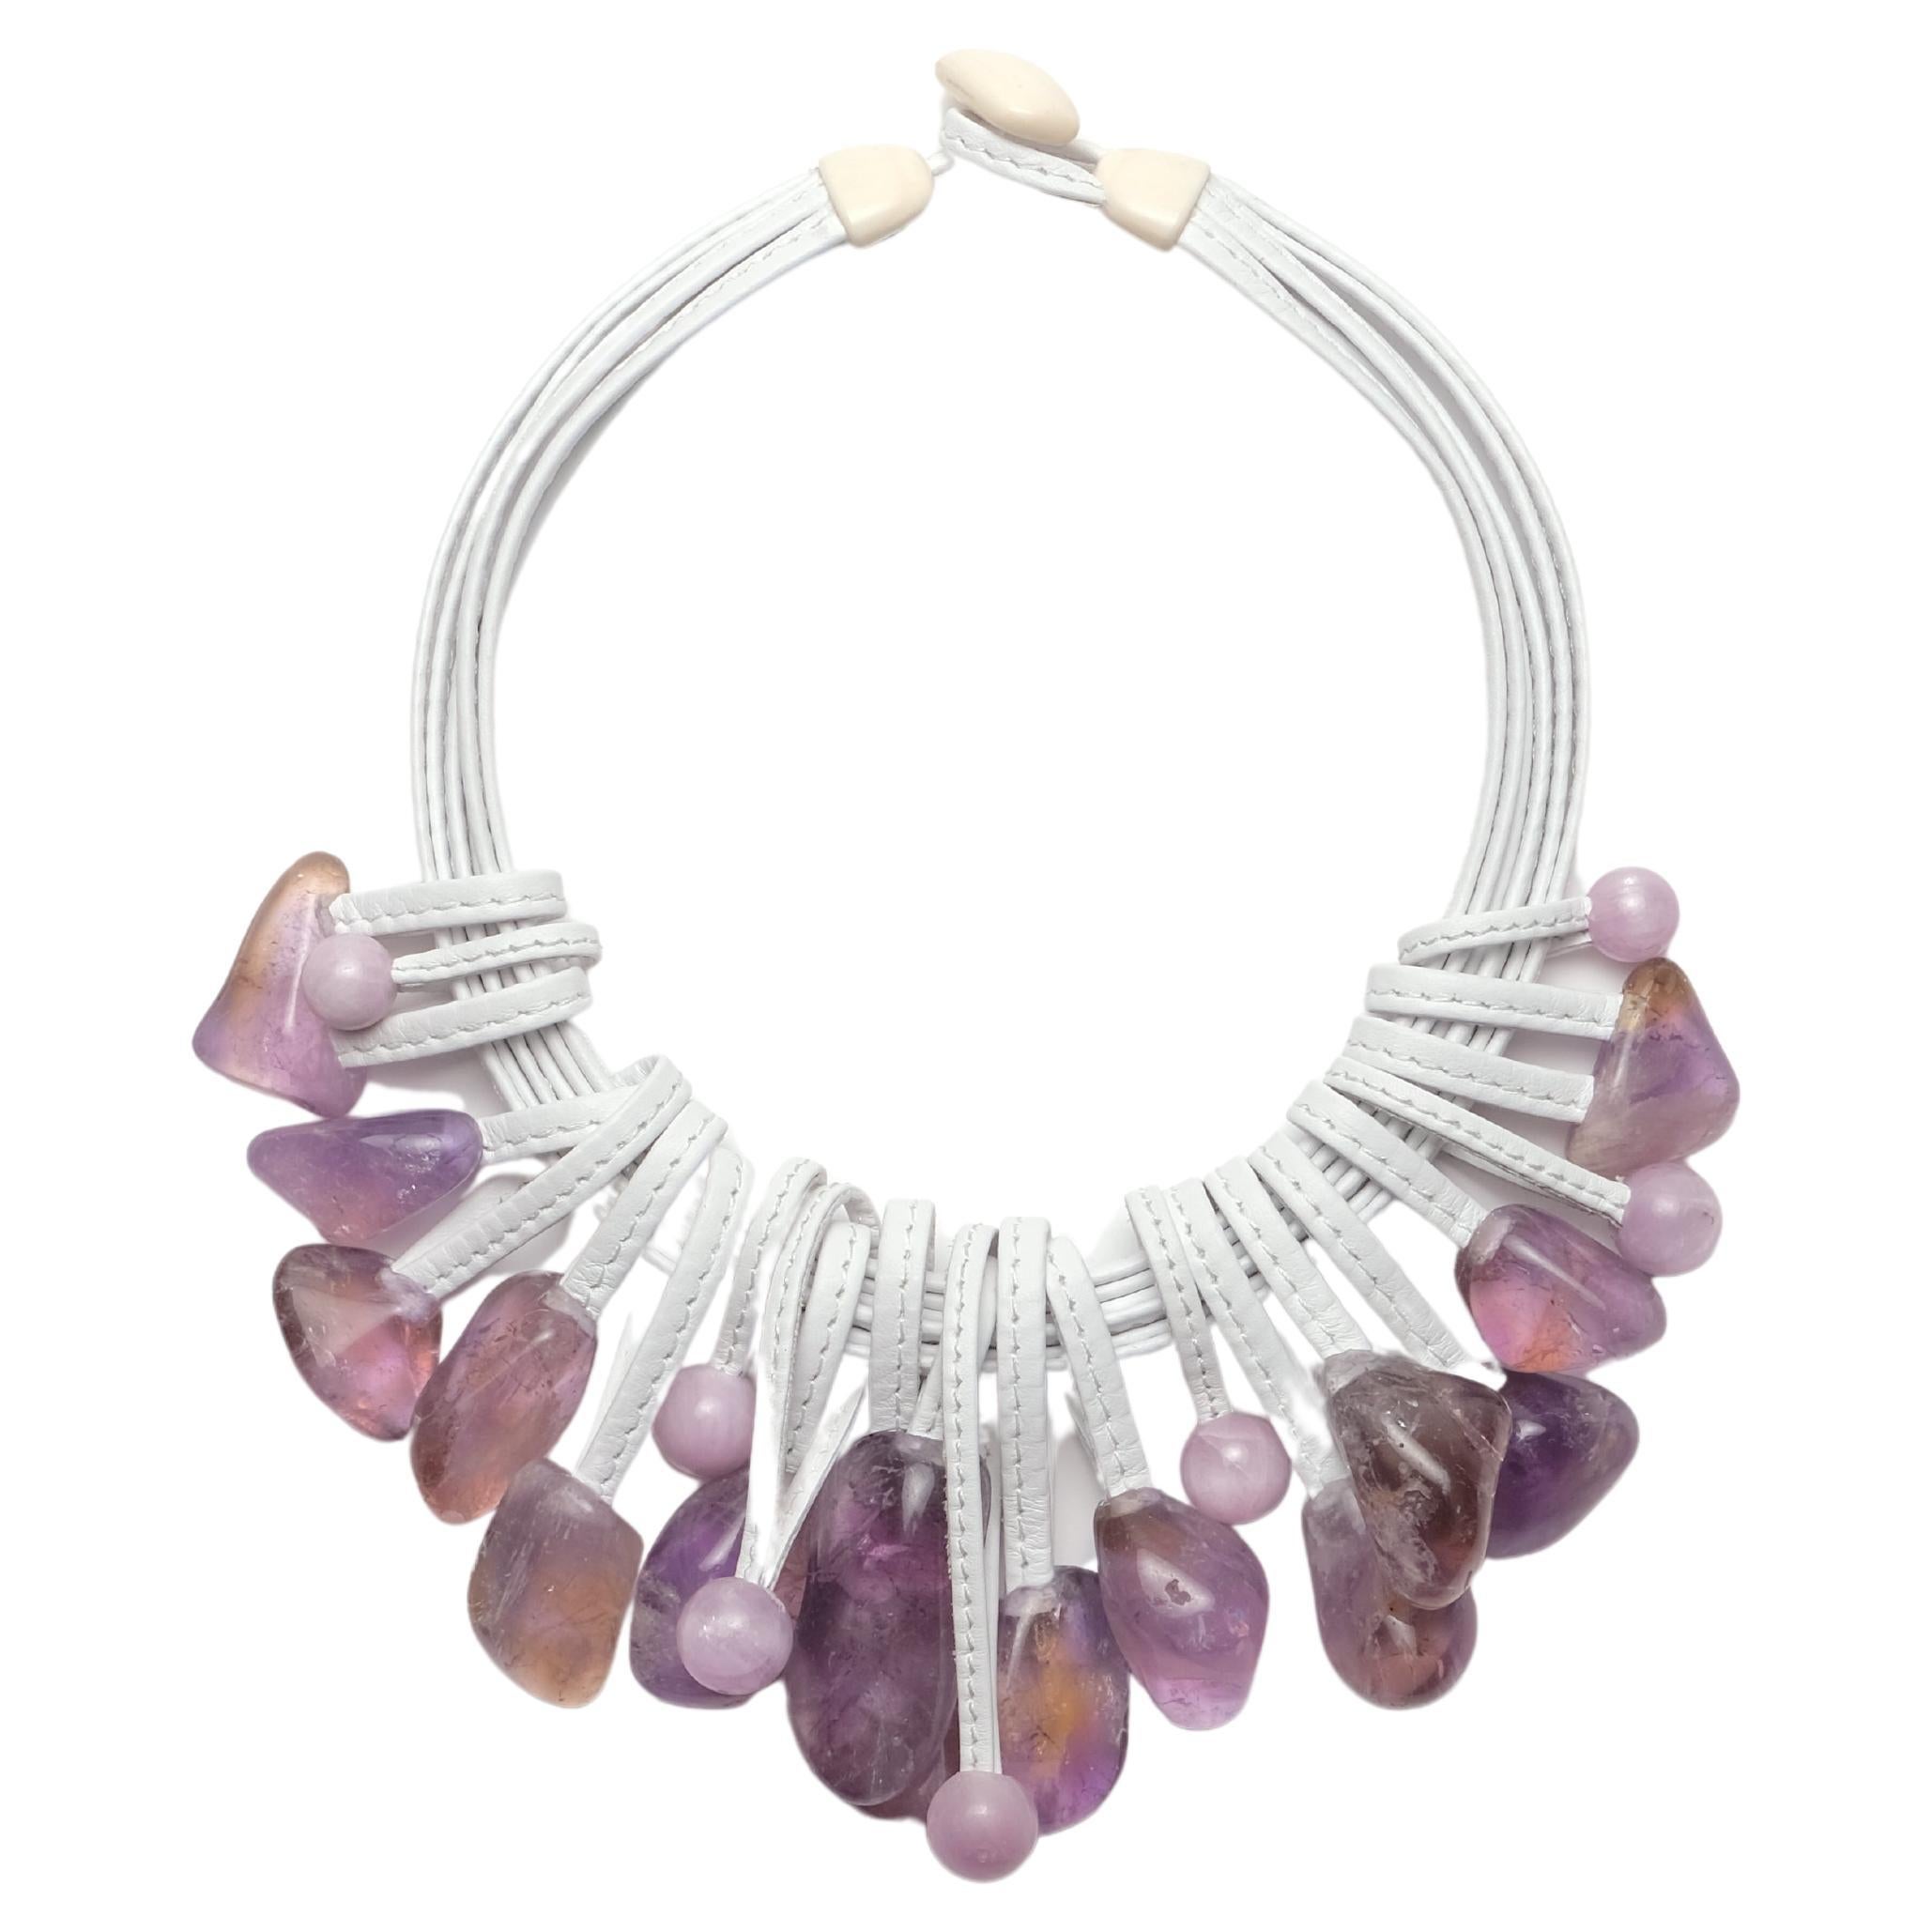 One-of-a-kind Necklace in Amethyst and Leather from the Danish Brand Monies For Sale